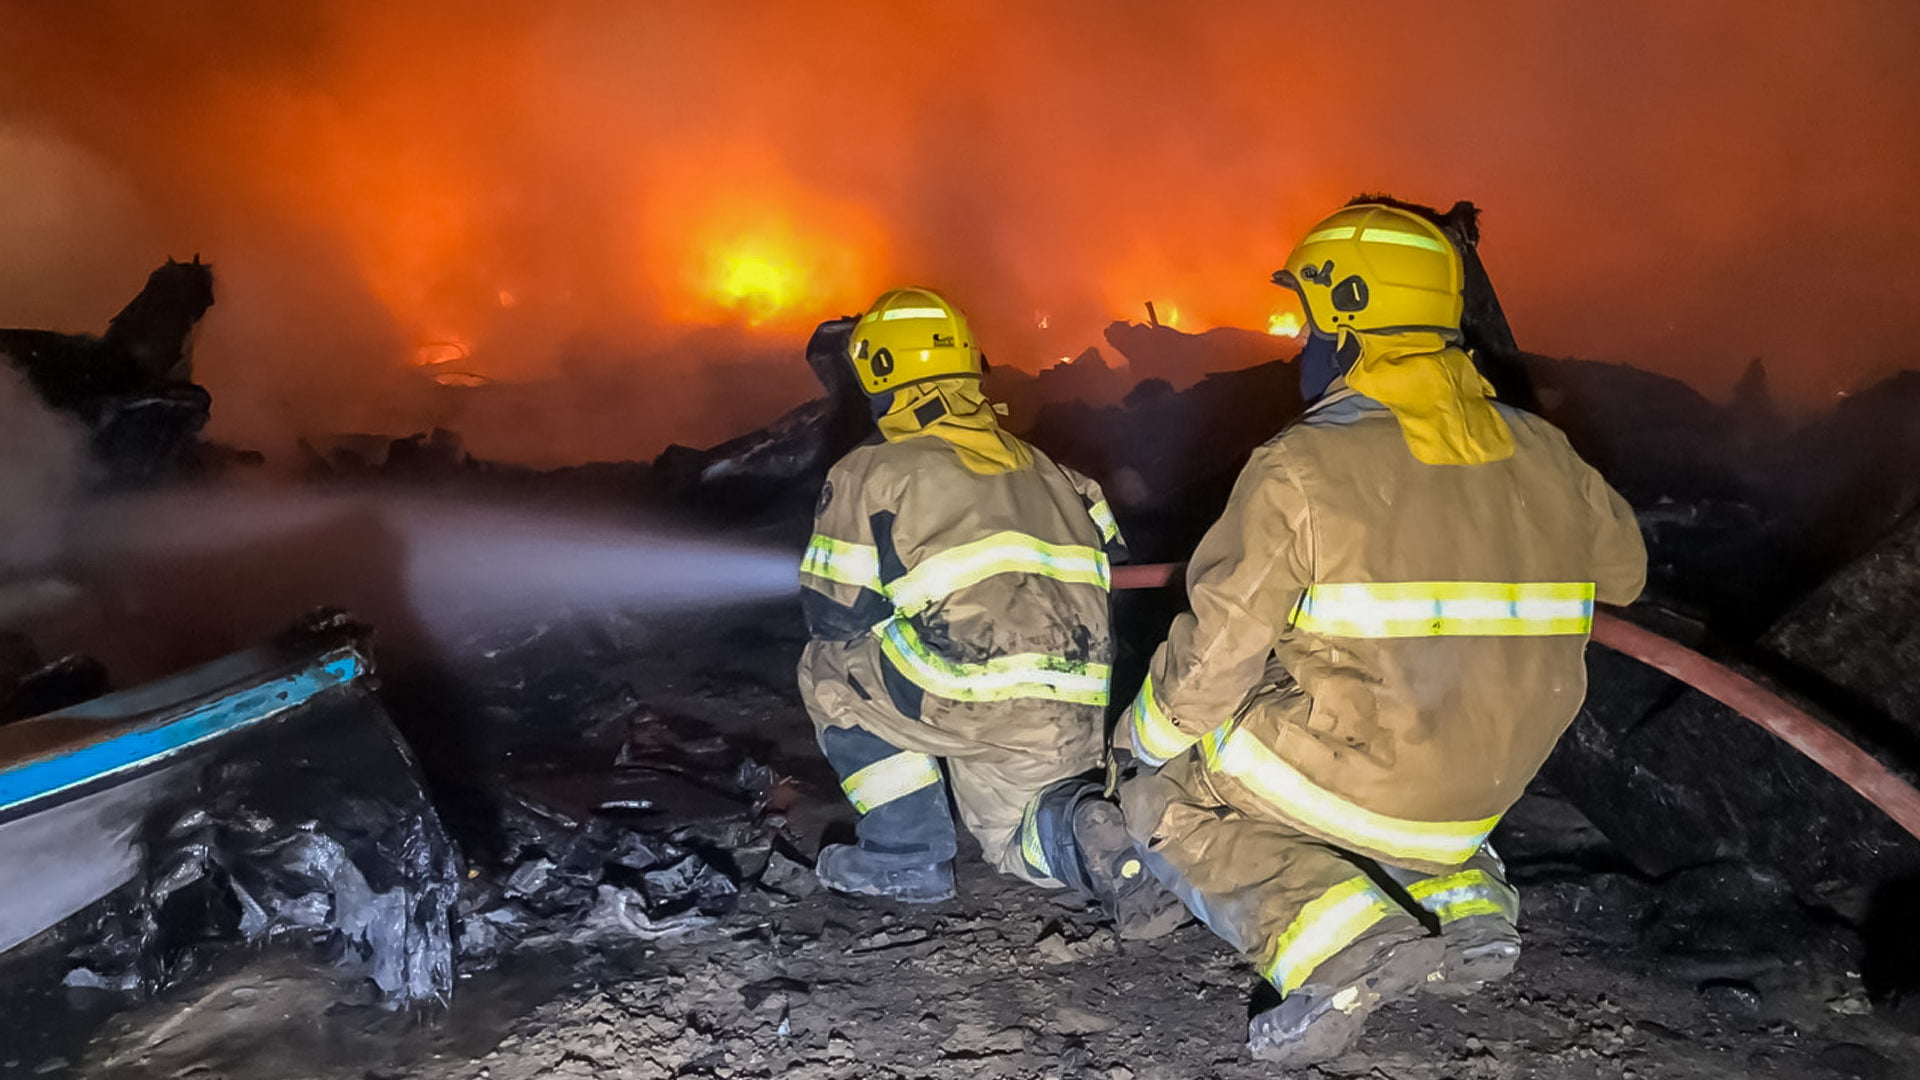 Major fire extinguished in Mina Abdullah in Kuwait, arson suspected